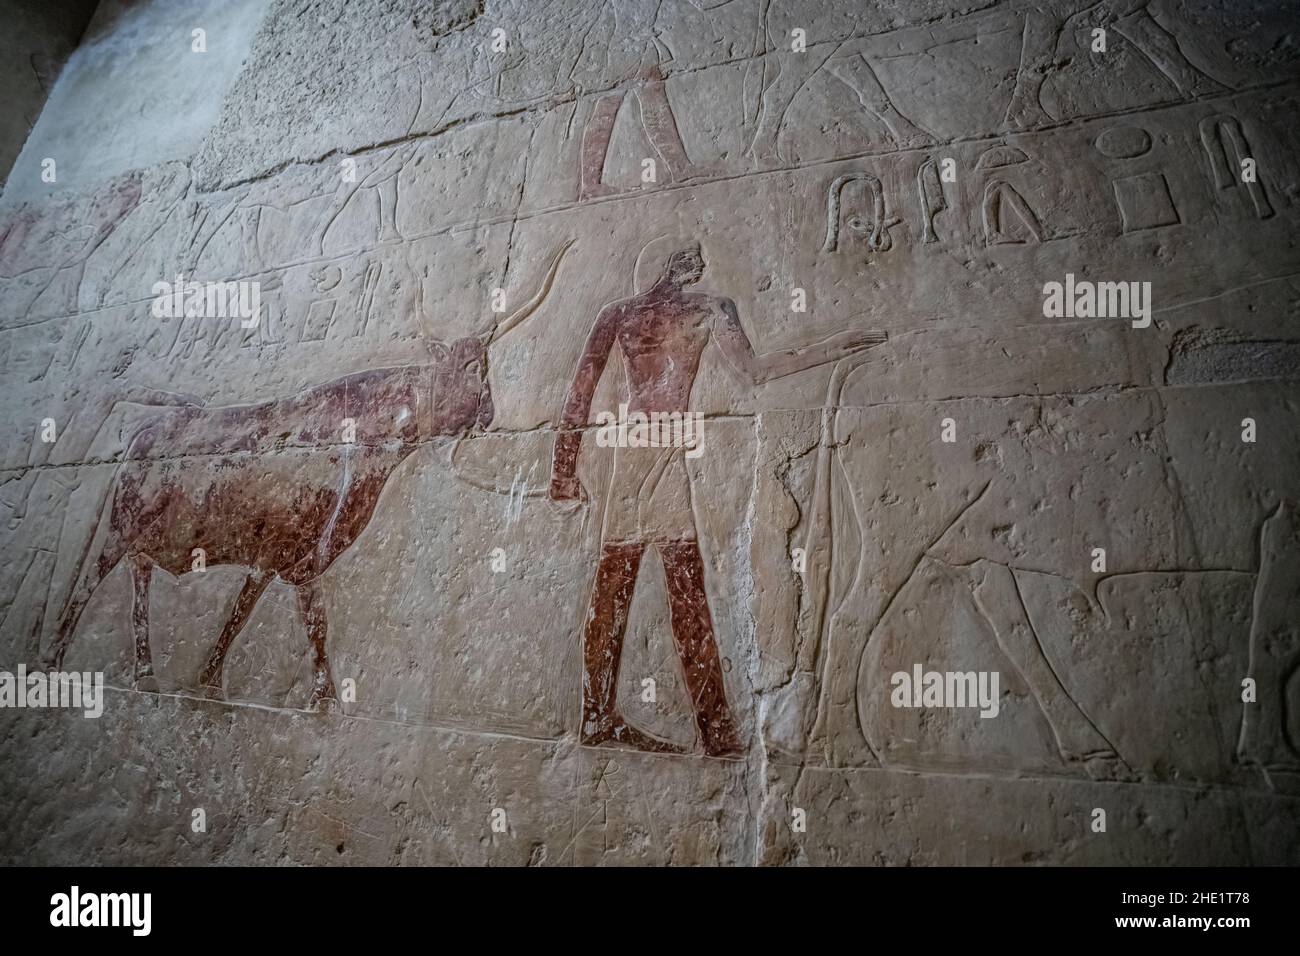 Ancient egyptian artwork showing a bull being led to the slaughter on one of the temple walls in the Saqqara necropolis in Egypt. Stock Photo